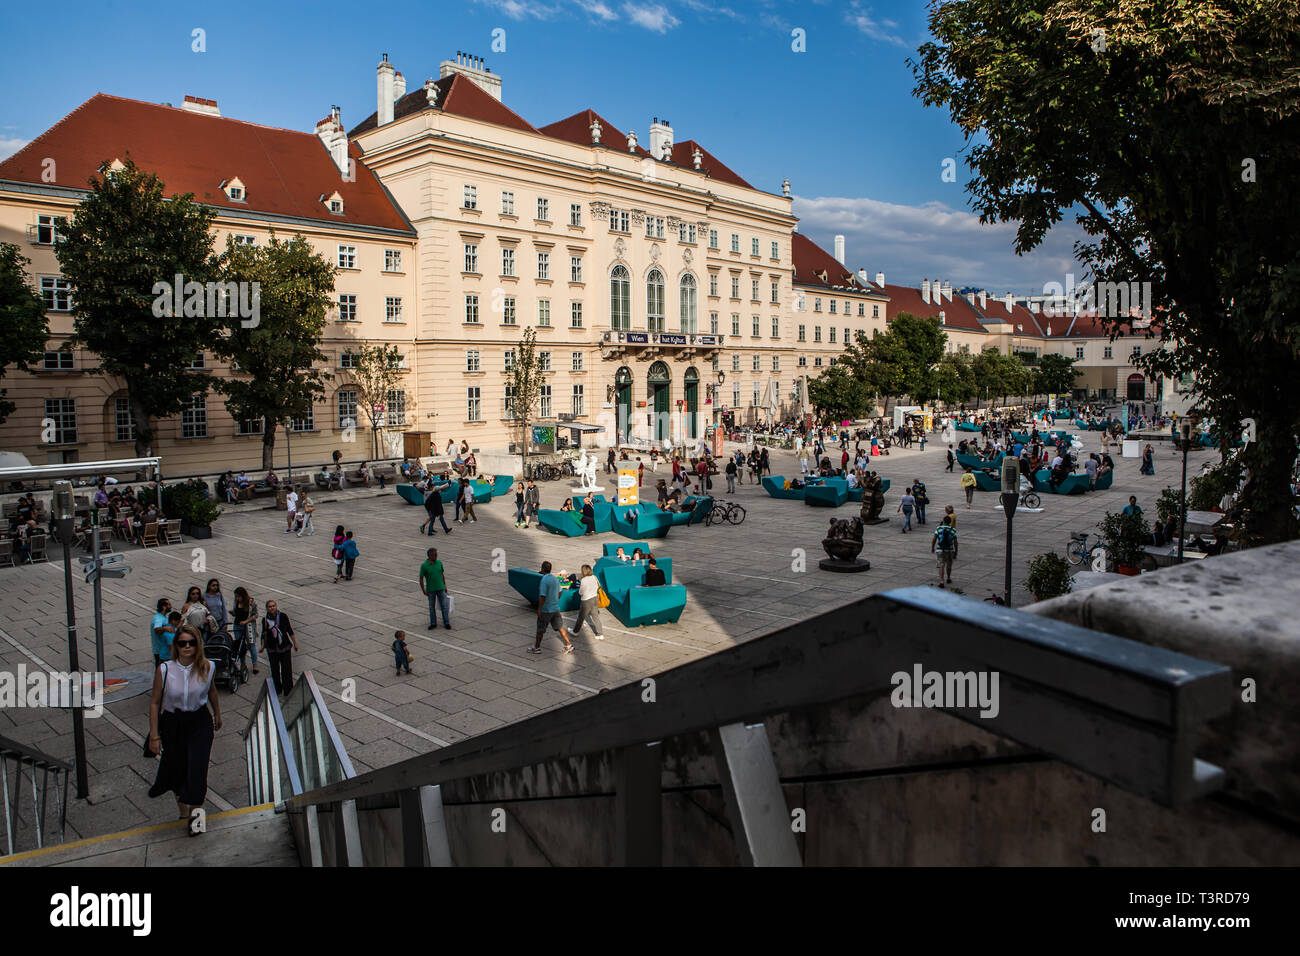 A sunny day at the museum quarter in Vienna, Austria, Museumsquartier, Wien Stock Photo